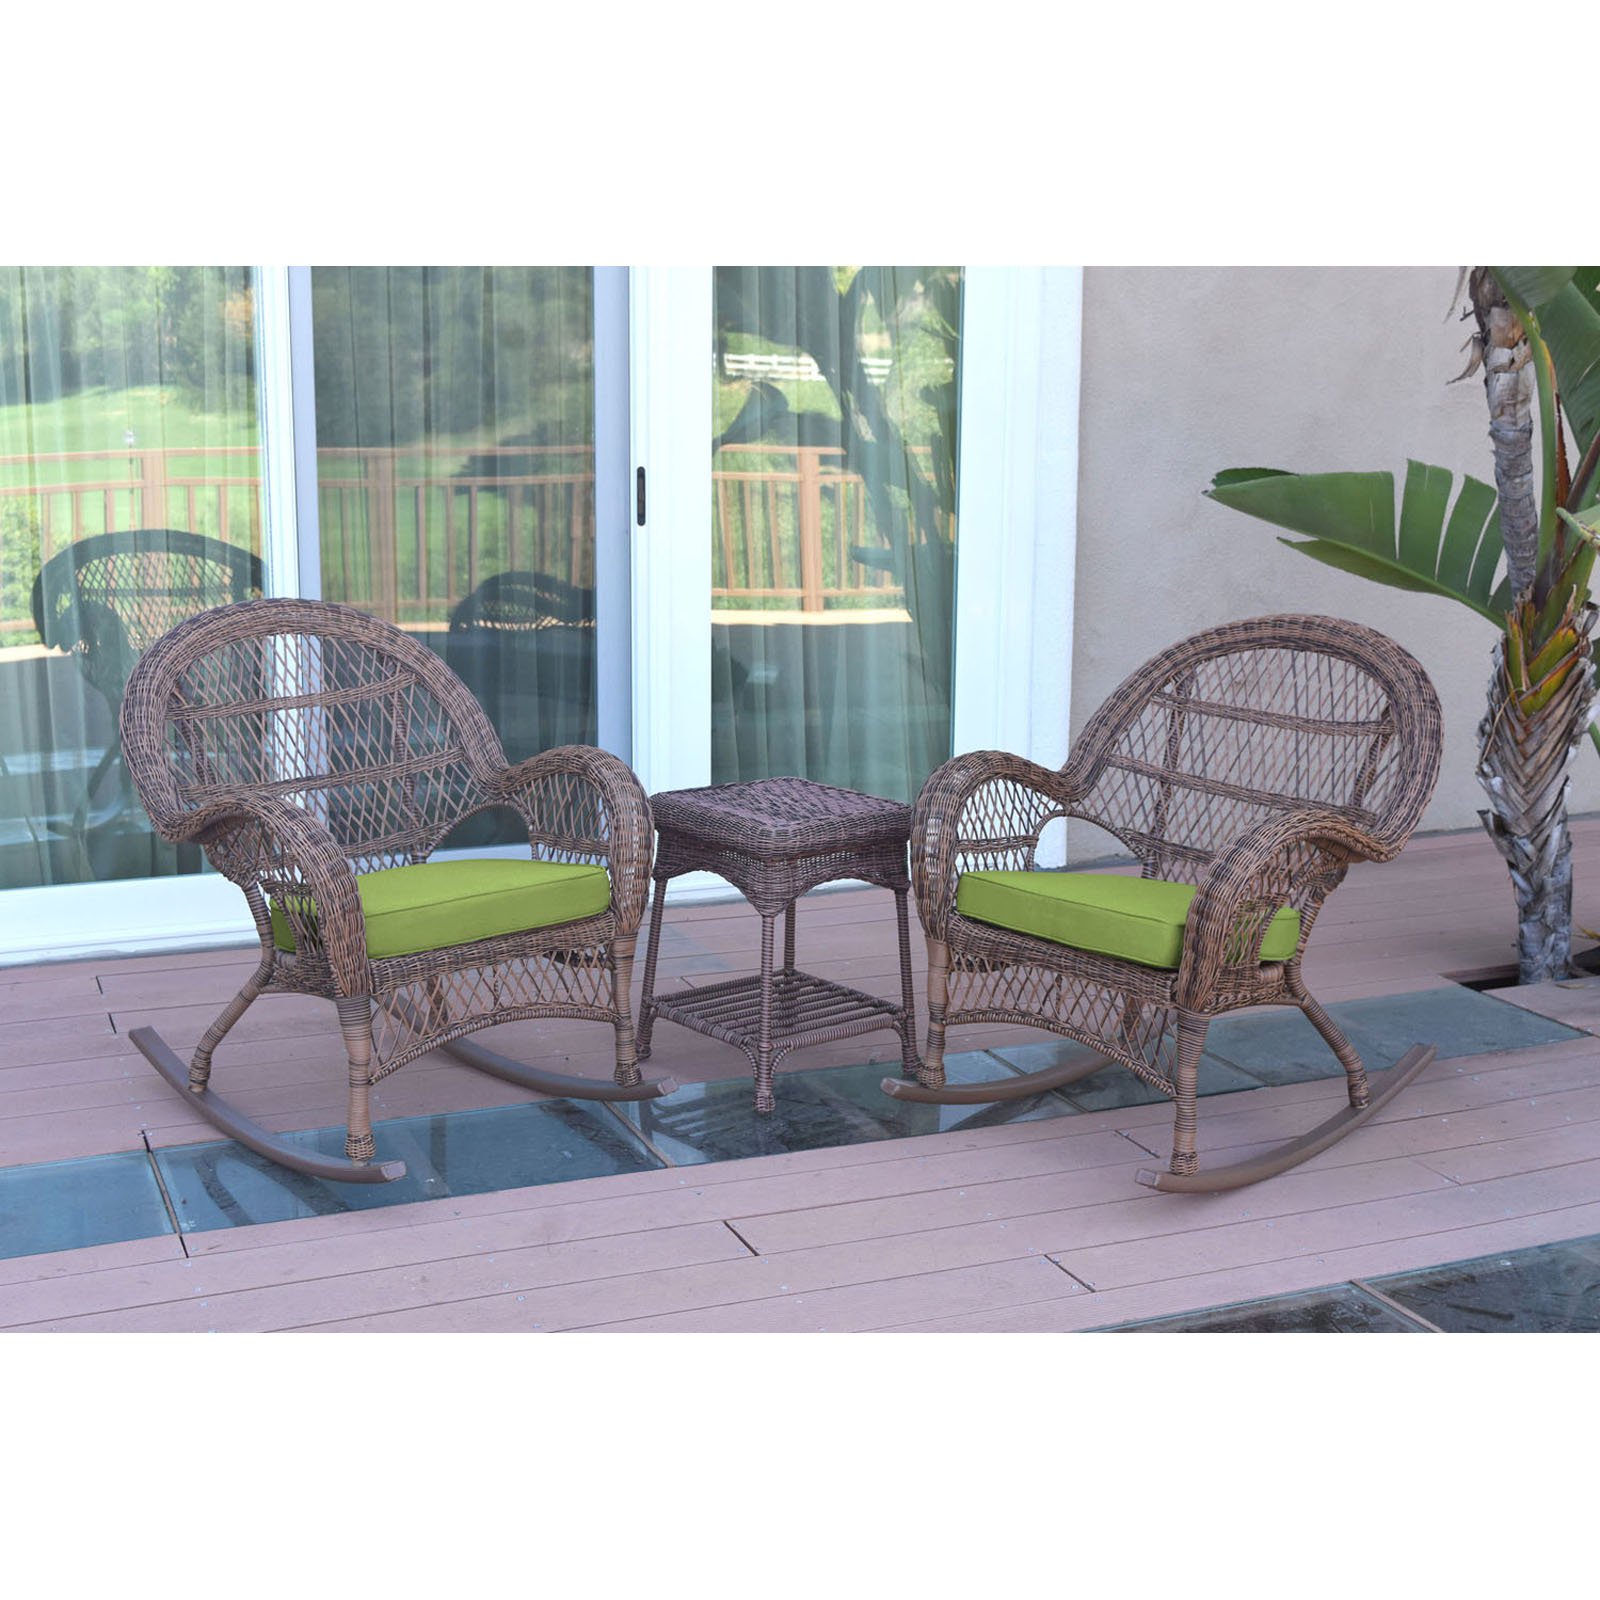 Jeco 3 Piece Wicker Conversation Set in Espresso with Red Cushions - image 1 of 11